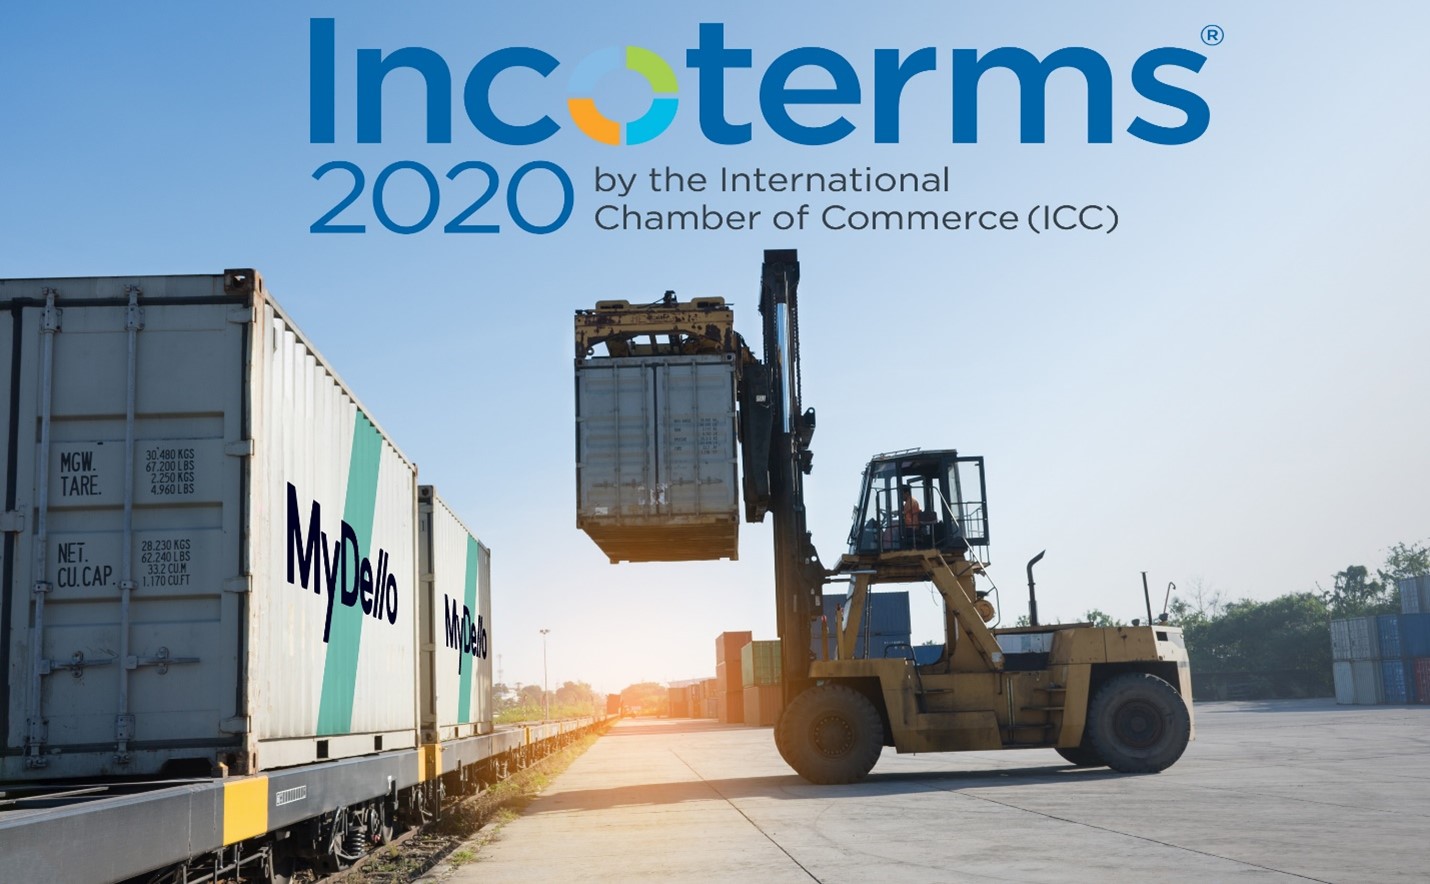 Mydello Incoterms 2020 Explained All You Need To Know About Terms Of